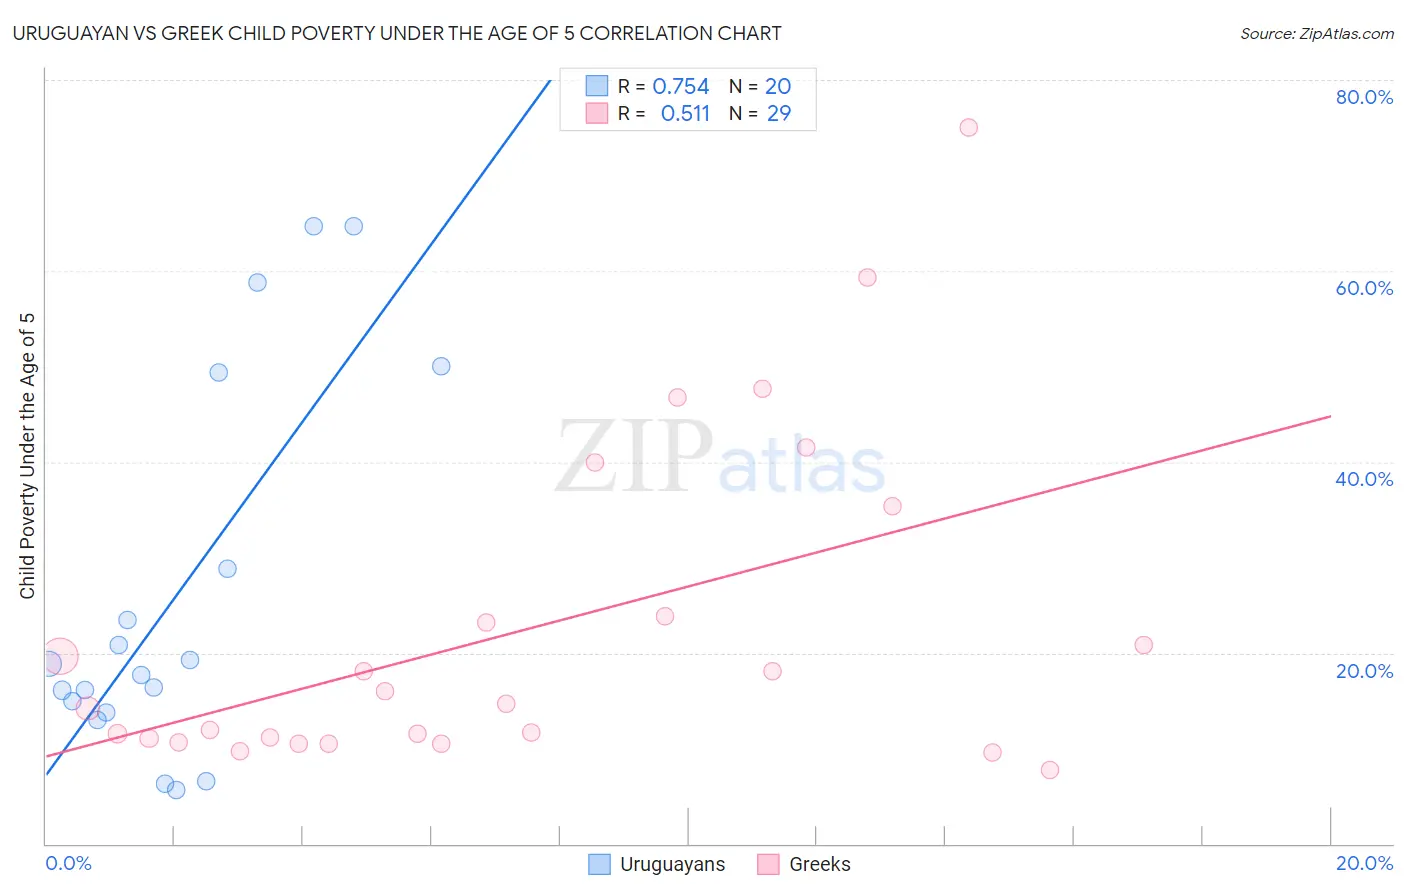 Uruguayan vs Greek Child Poverty Under the Age of 5